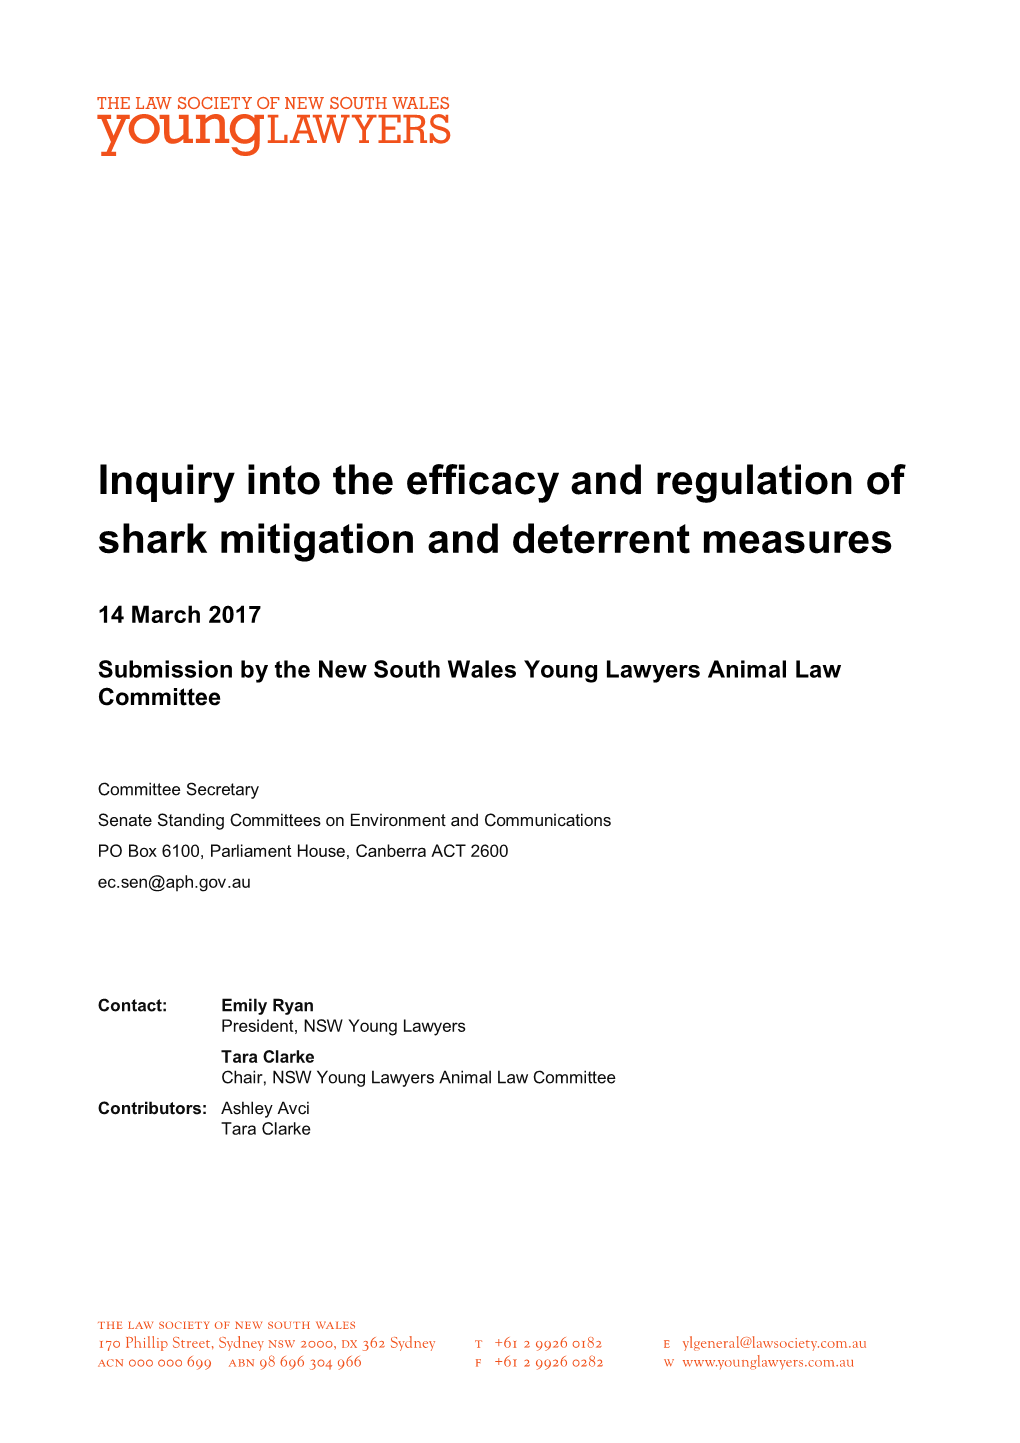 NSWYL Animal Law Committee | Inquiry Into the Efficacy and Regulation of Shark Mitigation and Deterrent Measures | March 2017 2